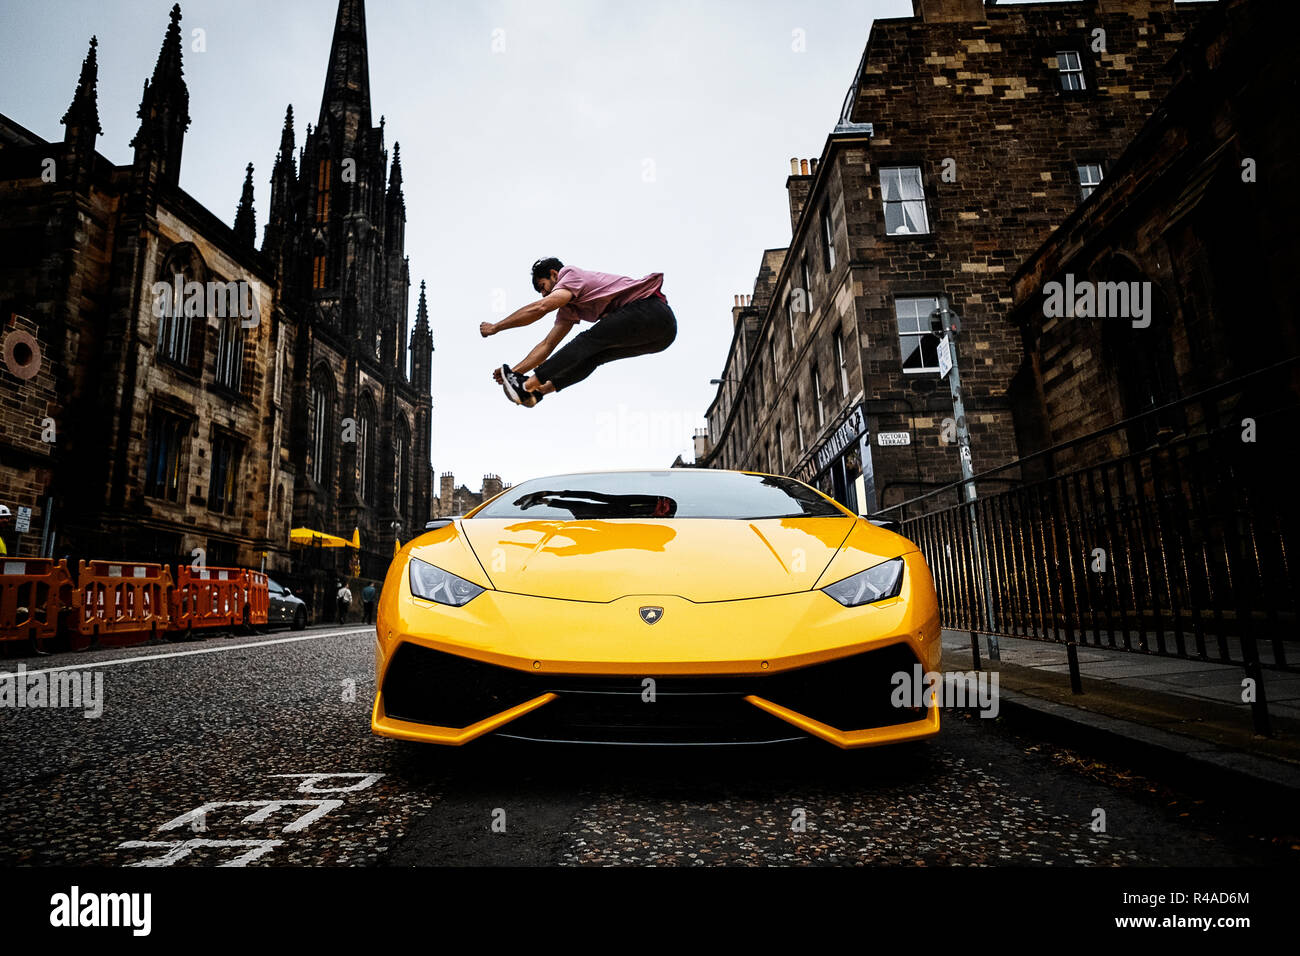 Images from the forty eight hour photography challenge Edinburgh Stock Photo